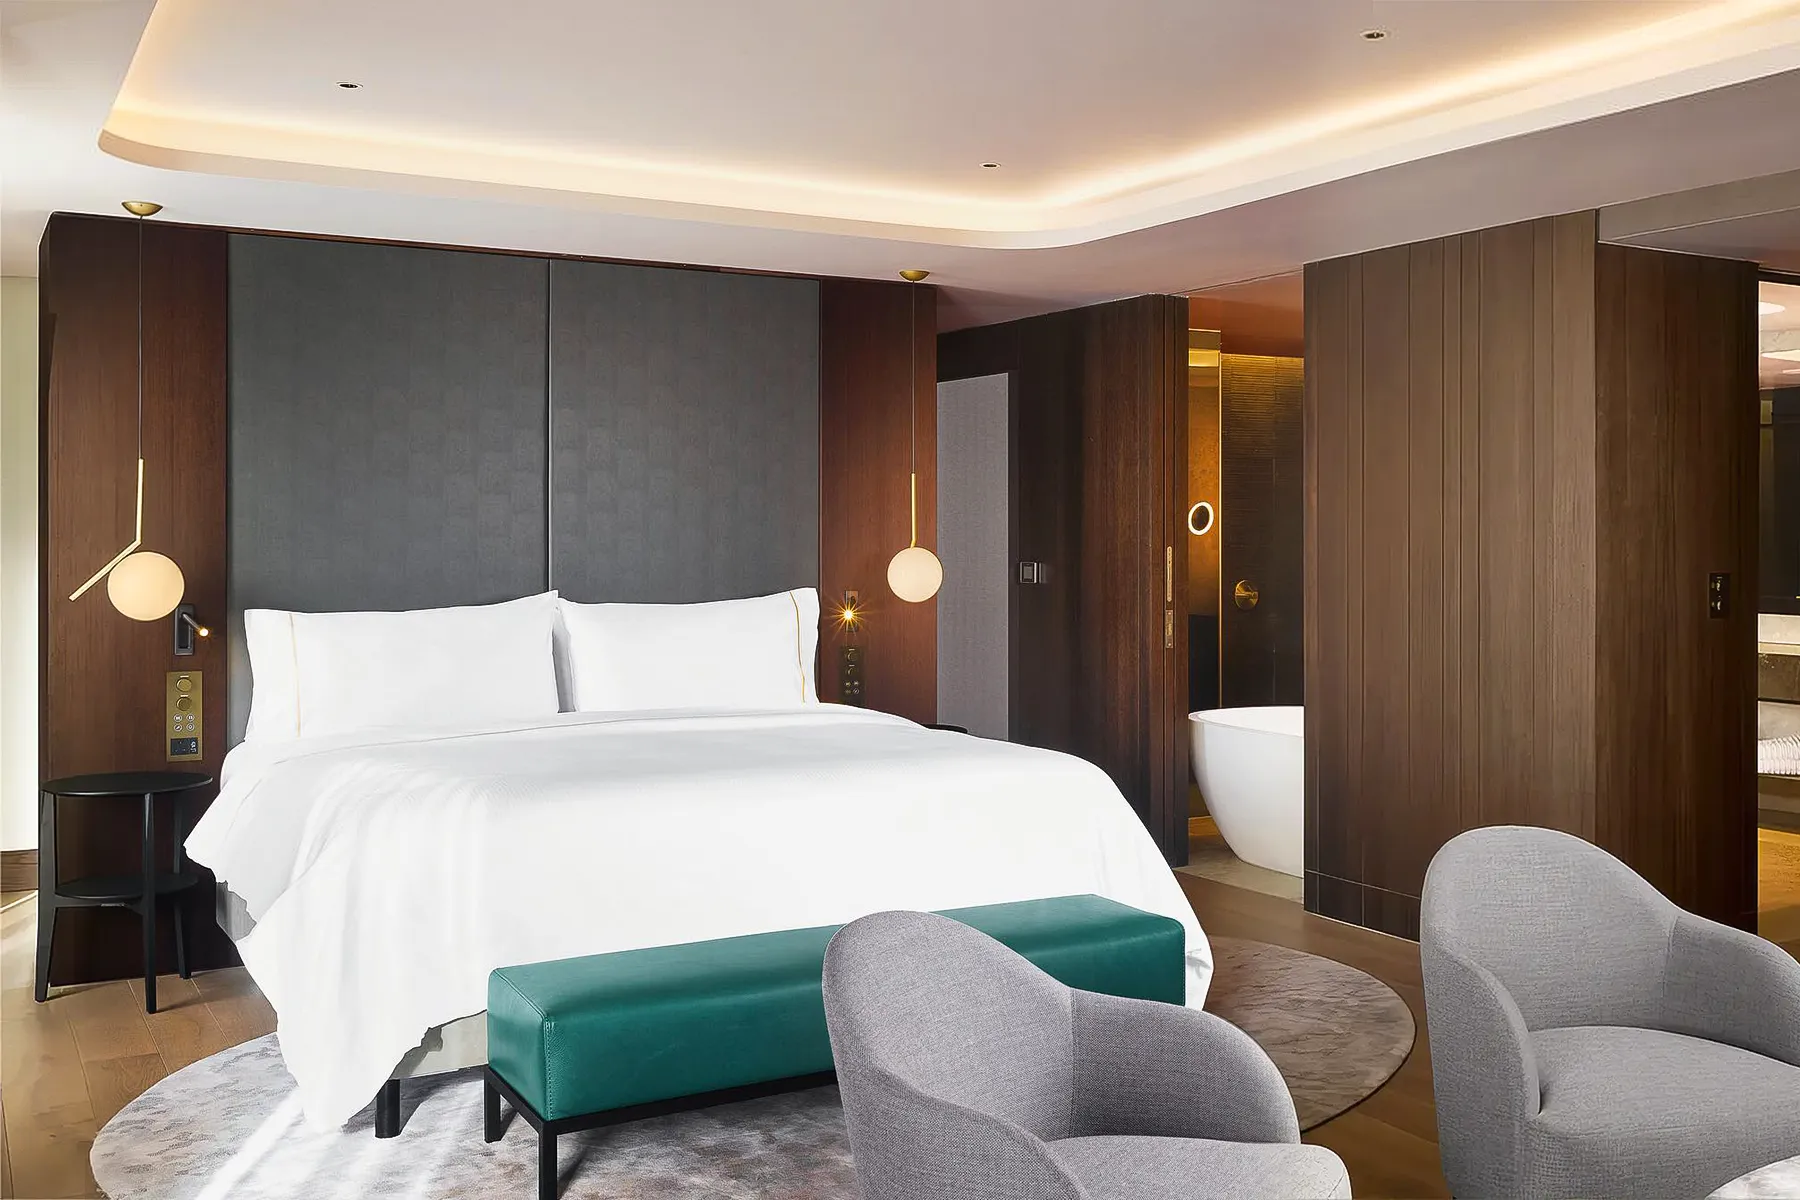 a modern hotel room with a bed and lounge chairs contract furniture - interior design uk